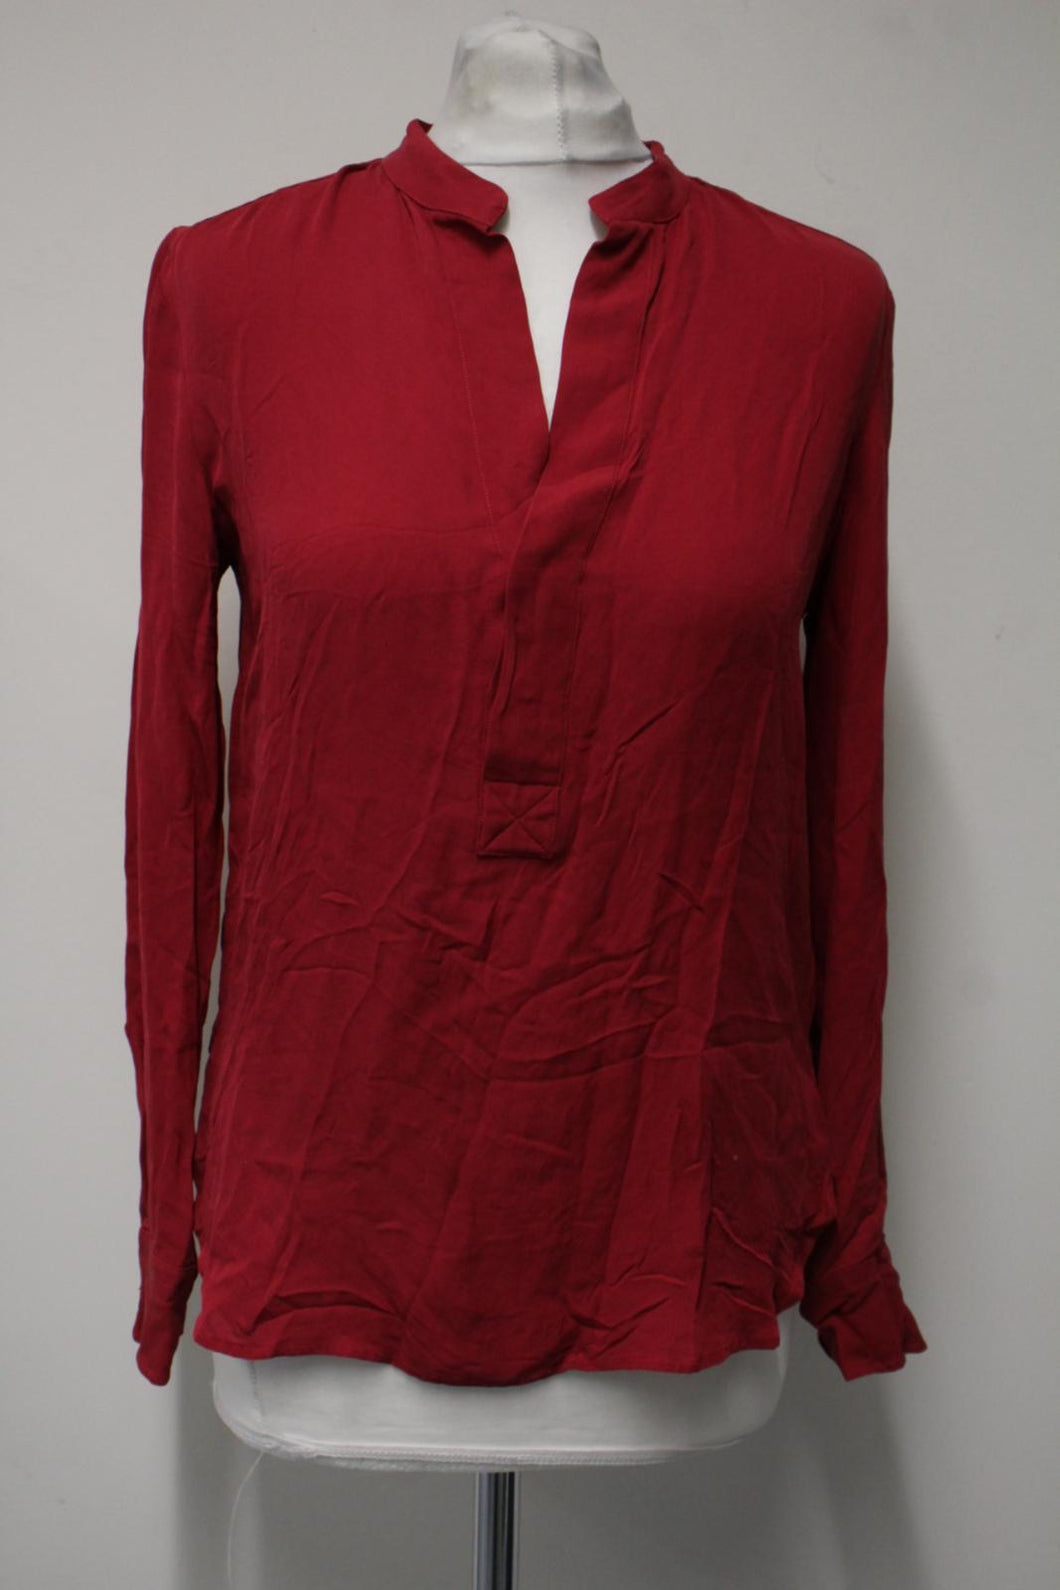 RALPH LAUREN Ladies Deep Red Silk Long Sleeve Collared V-Neck Blouse Size S